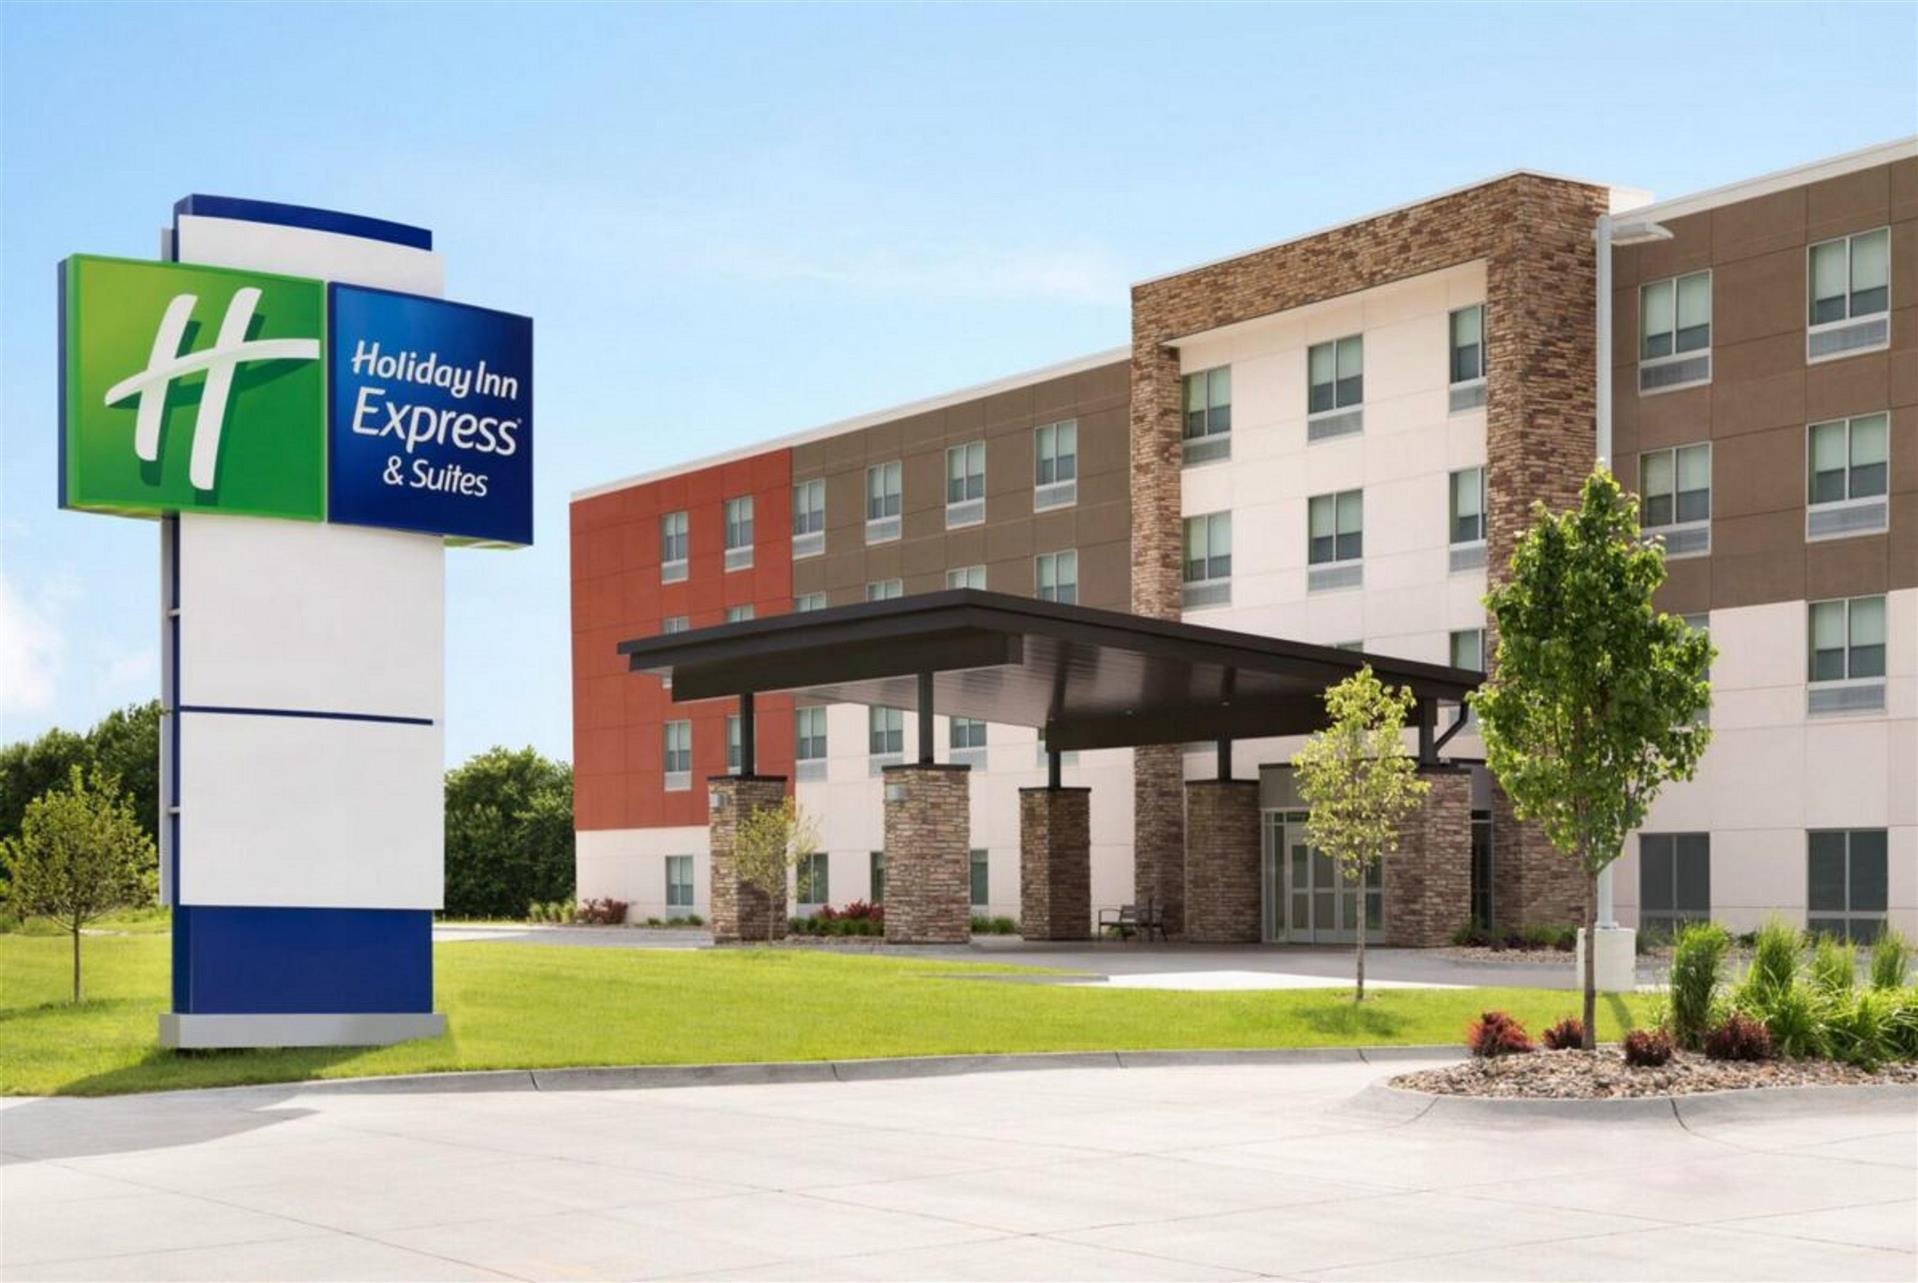 Holiday Inn Express & Suites Bronx - NYC in Bronx, NY